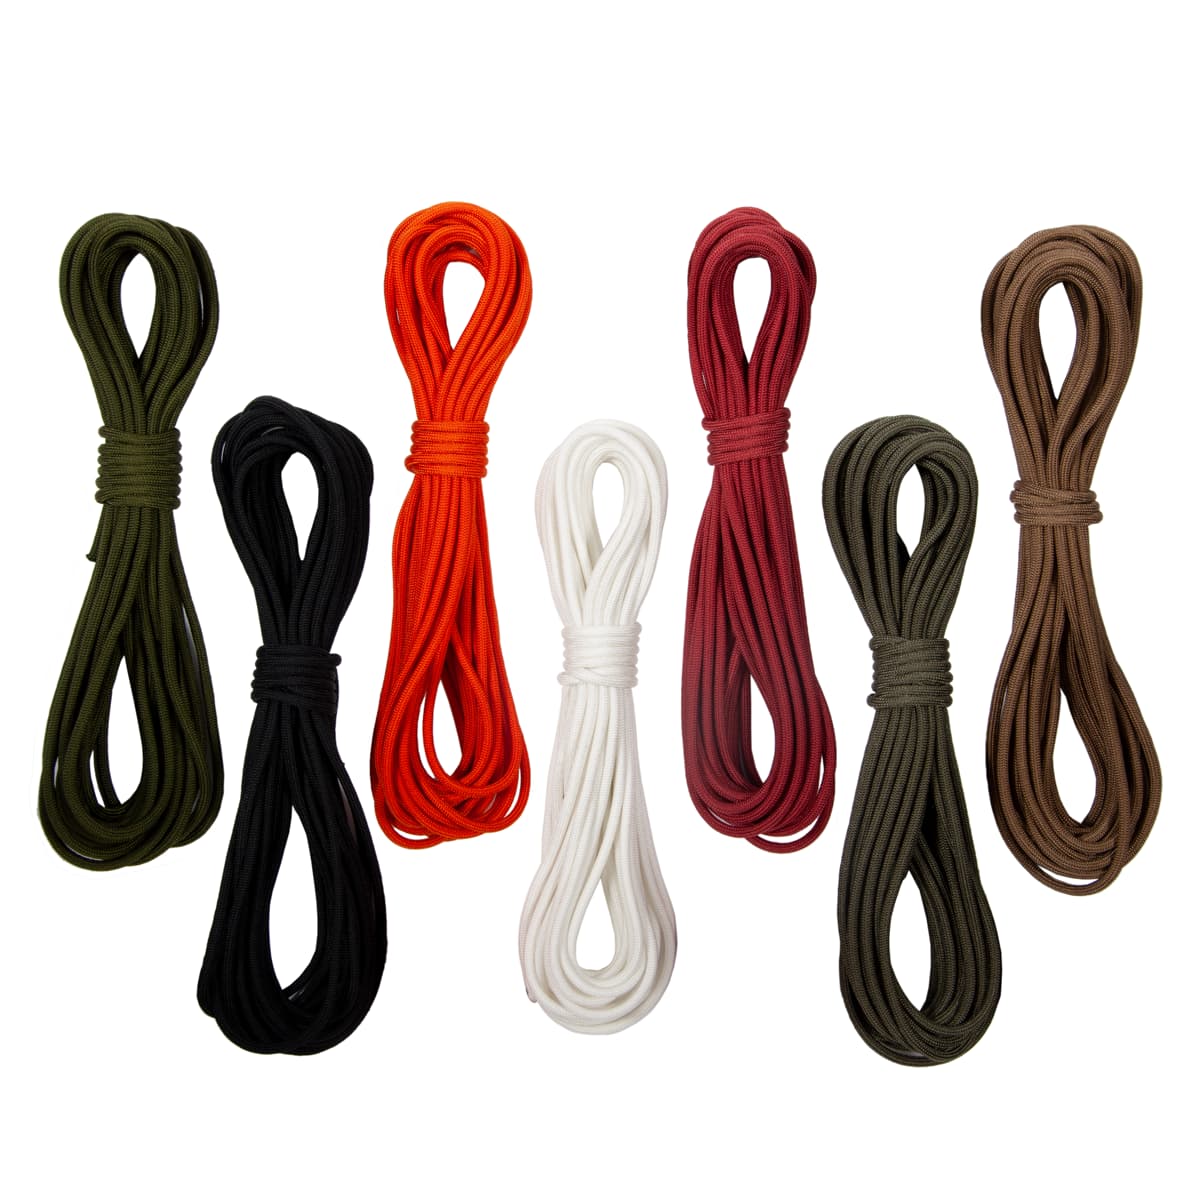 Richelieu 644811TV Paracord, Military Grade 550, Red, 5/32 In. x 400 Ft. -  Quantity 2 